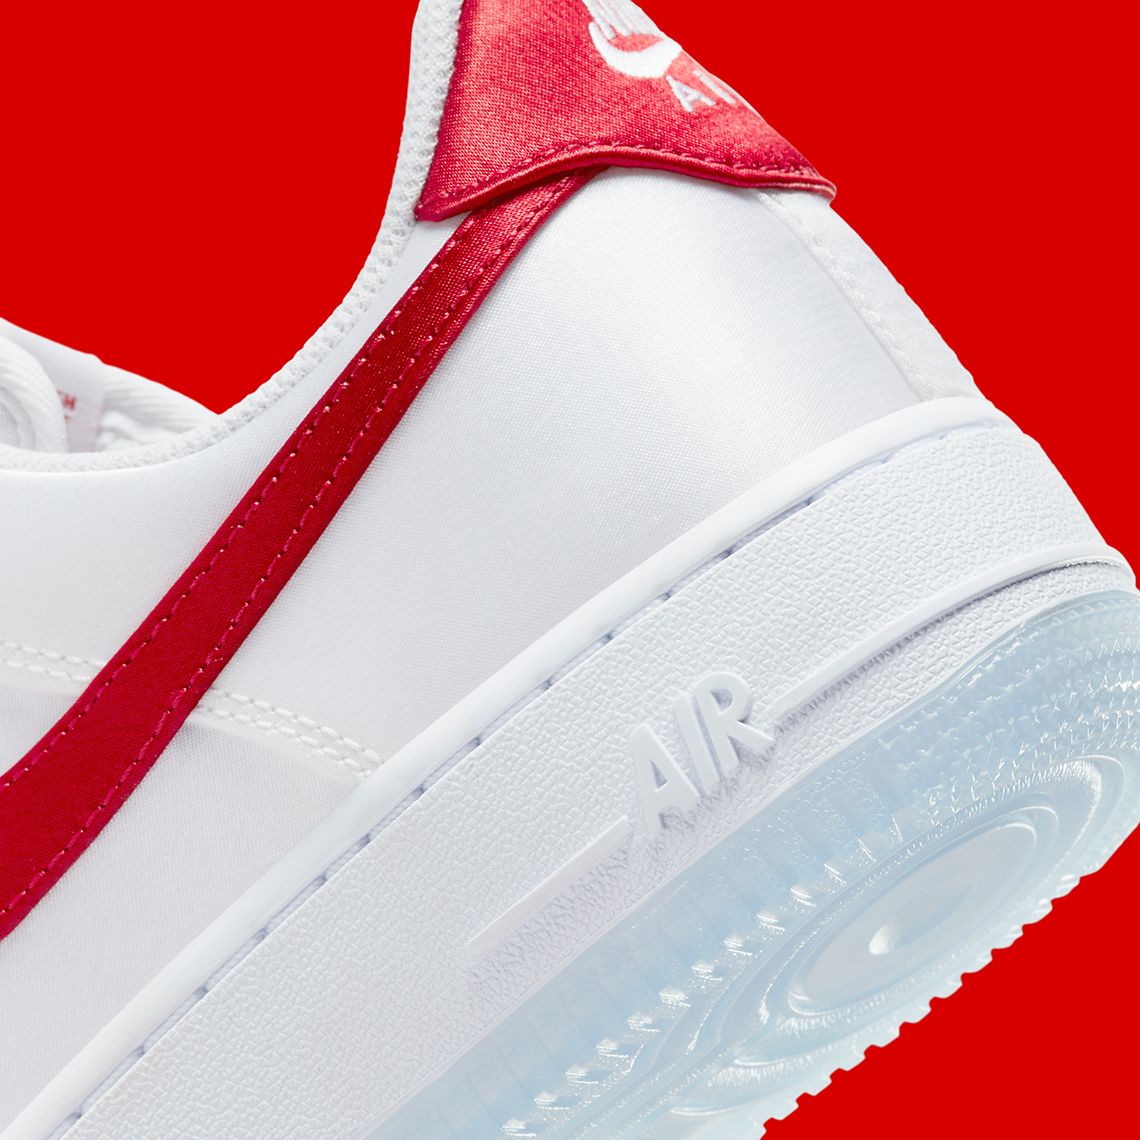 nike color air force 1 low satin white red dx6541 100 6